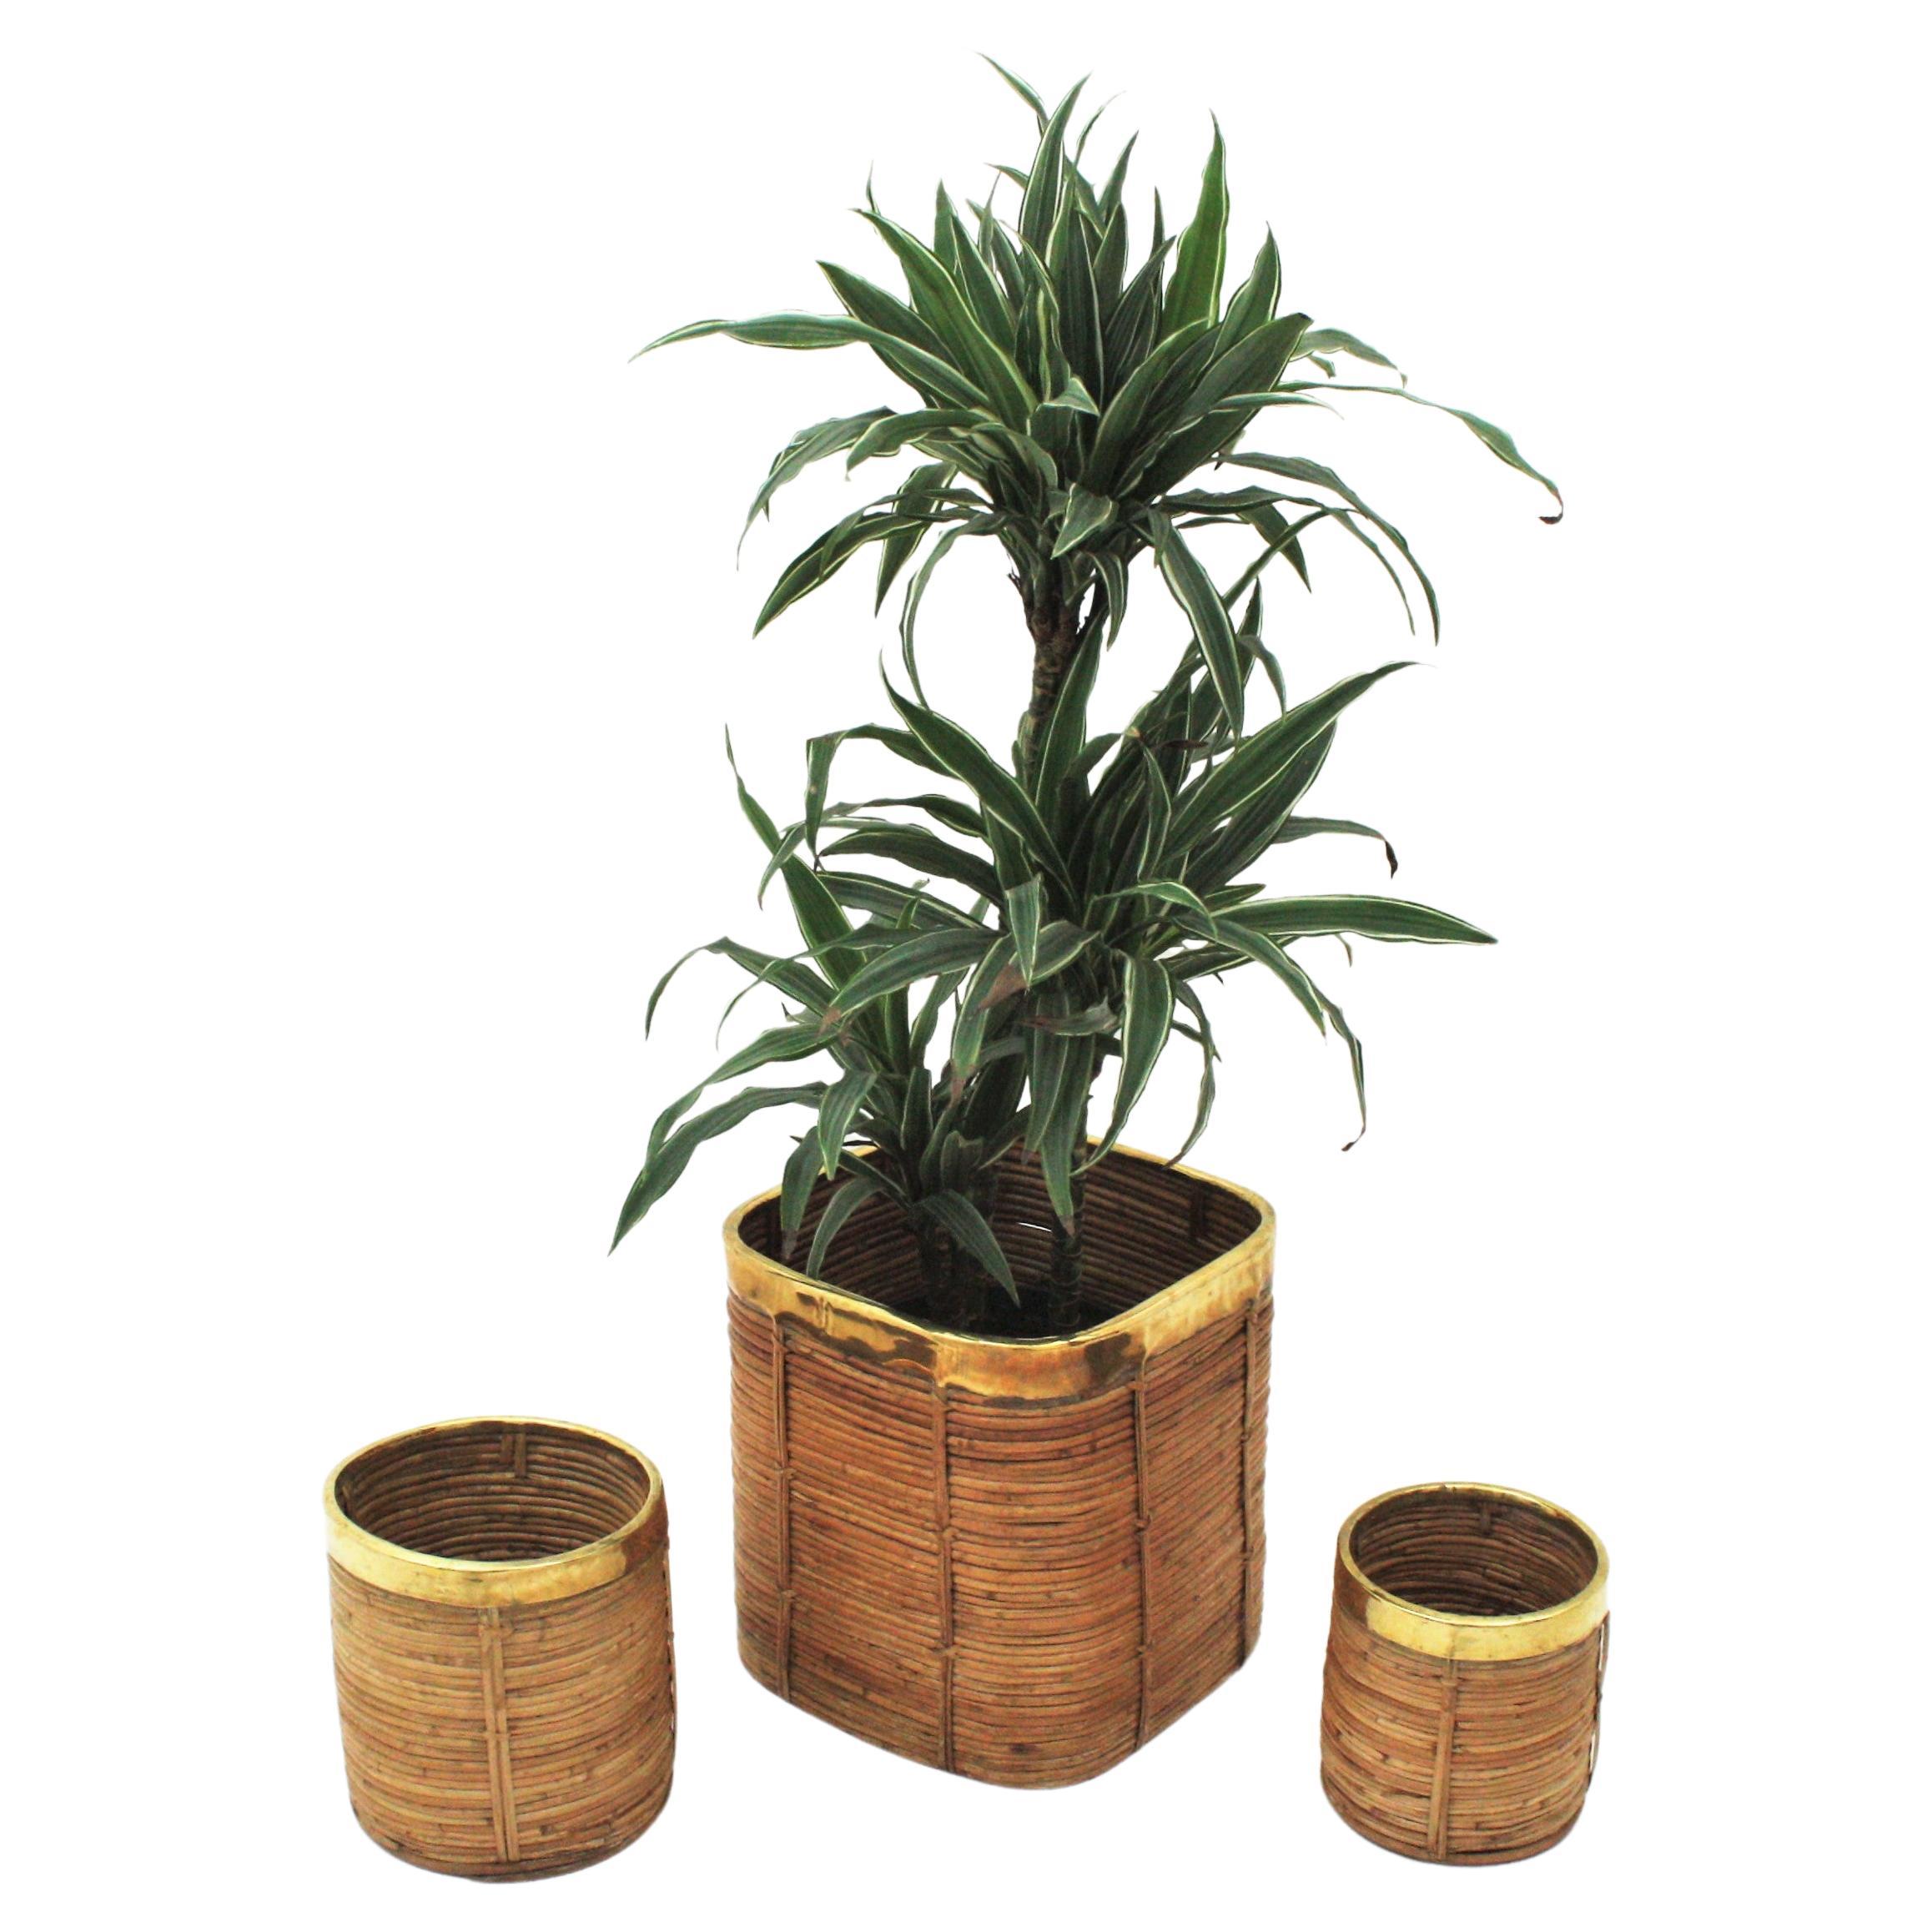 Set of Three Mid-Century Modern rattan planters / baskets with brass rims. Italy, 1970s
Three rattan baskets in different sizes. The larger one in squared shape and the smallers round design.
Use them as decorative baskets or for storage purposes to